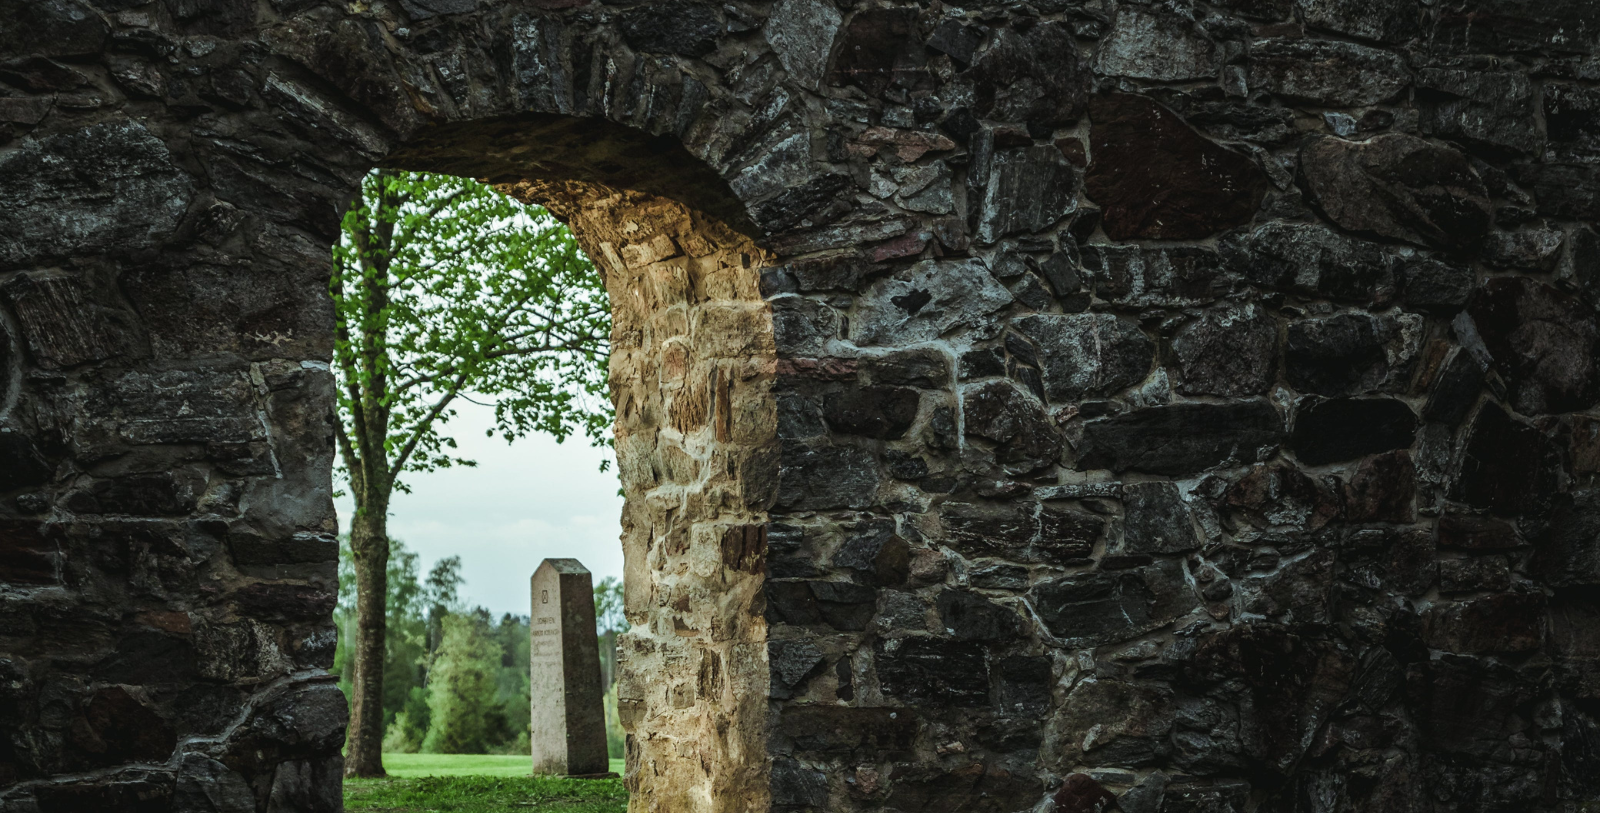 Explore the ancient Nes Church Ruins, the first stone church, built in the 12th century.